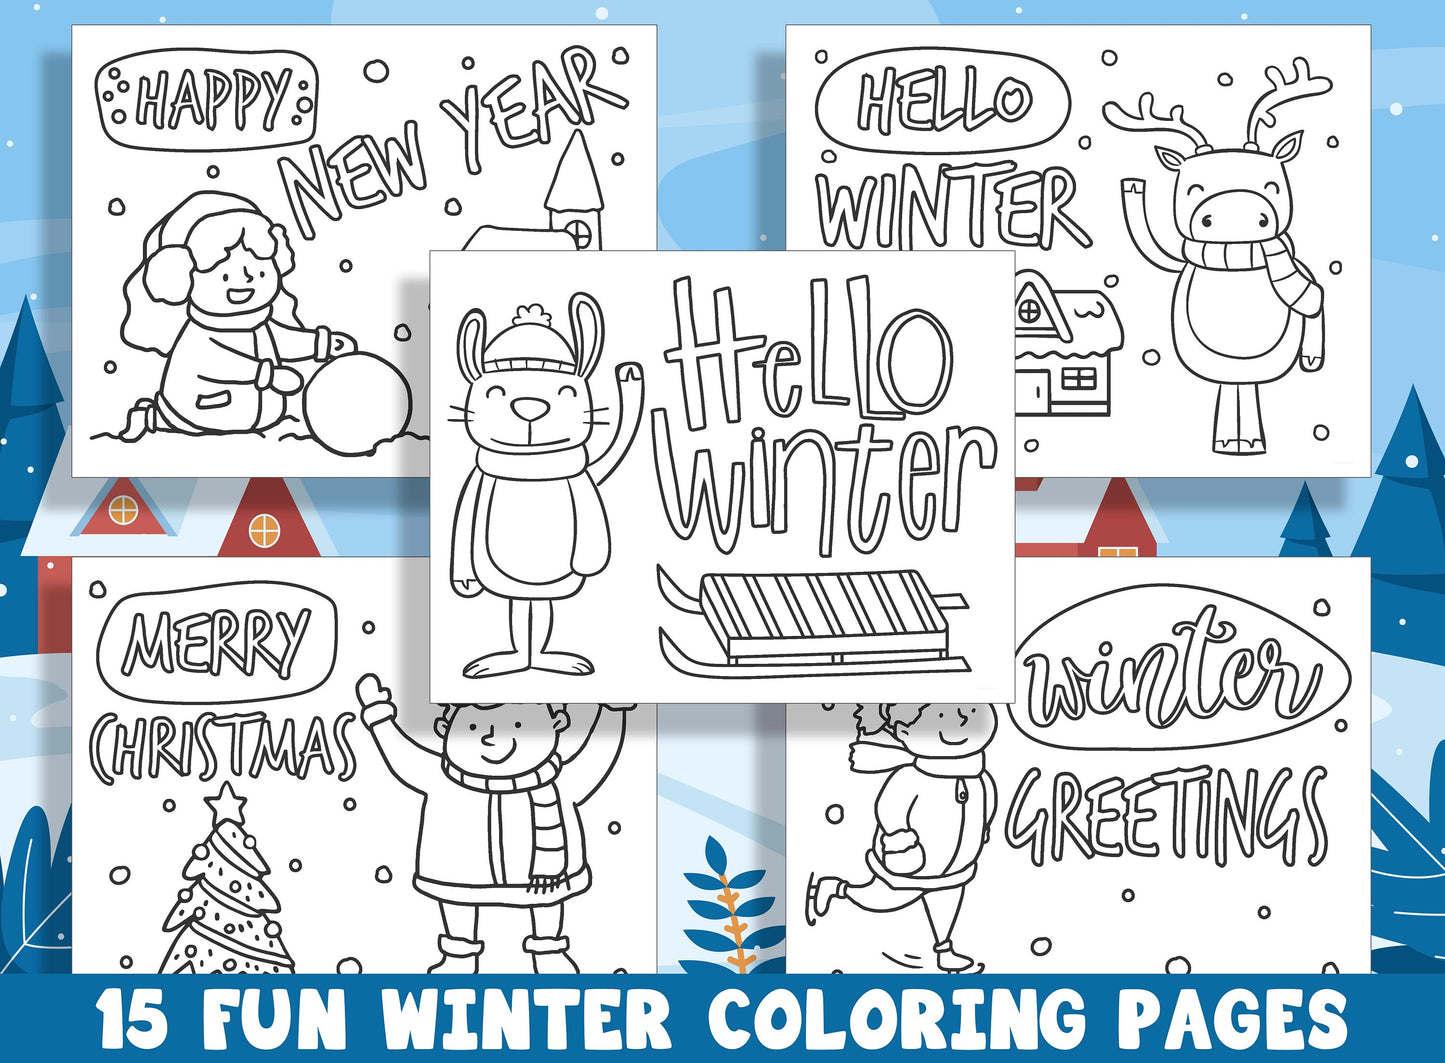 Fun Winter Coloring Pages: 15 Fun and Playful Designs for Preschool and Kindergarten, PDF File, Instant Download